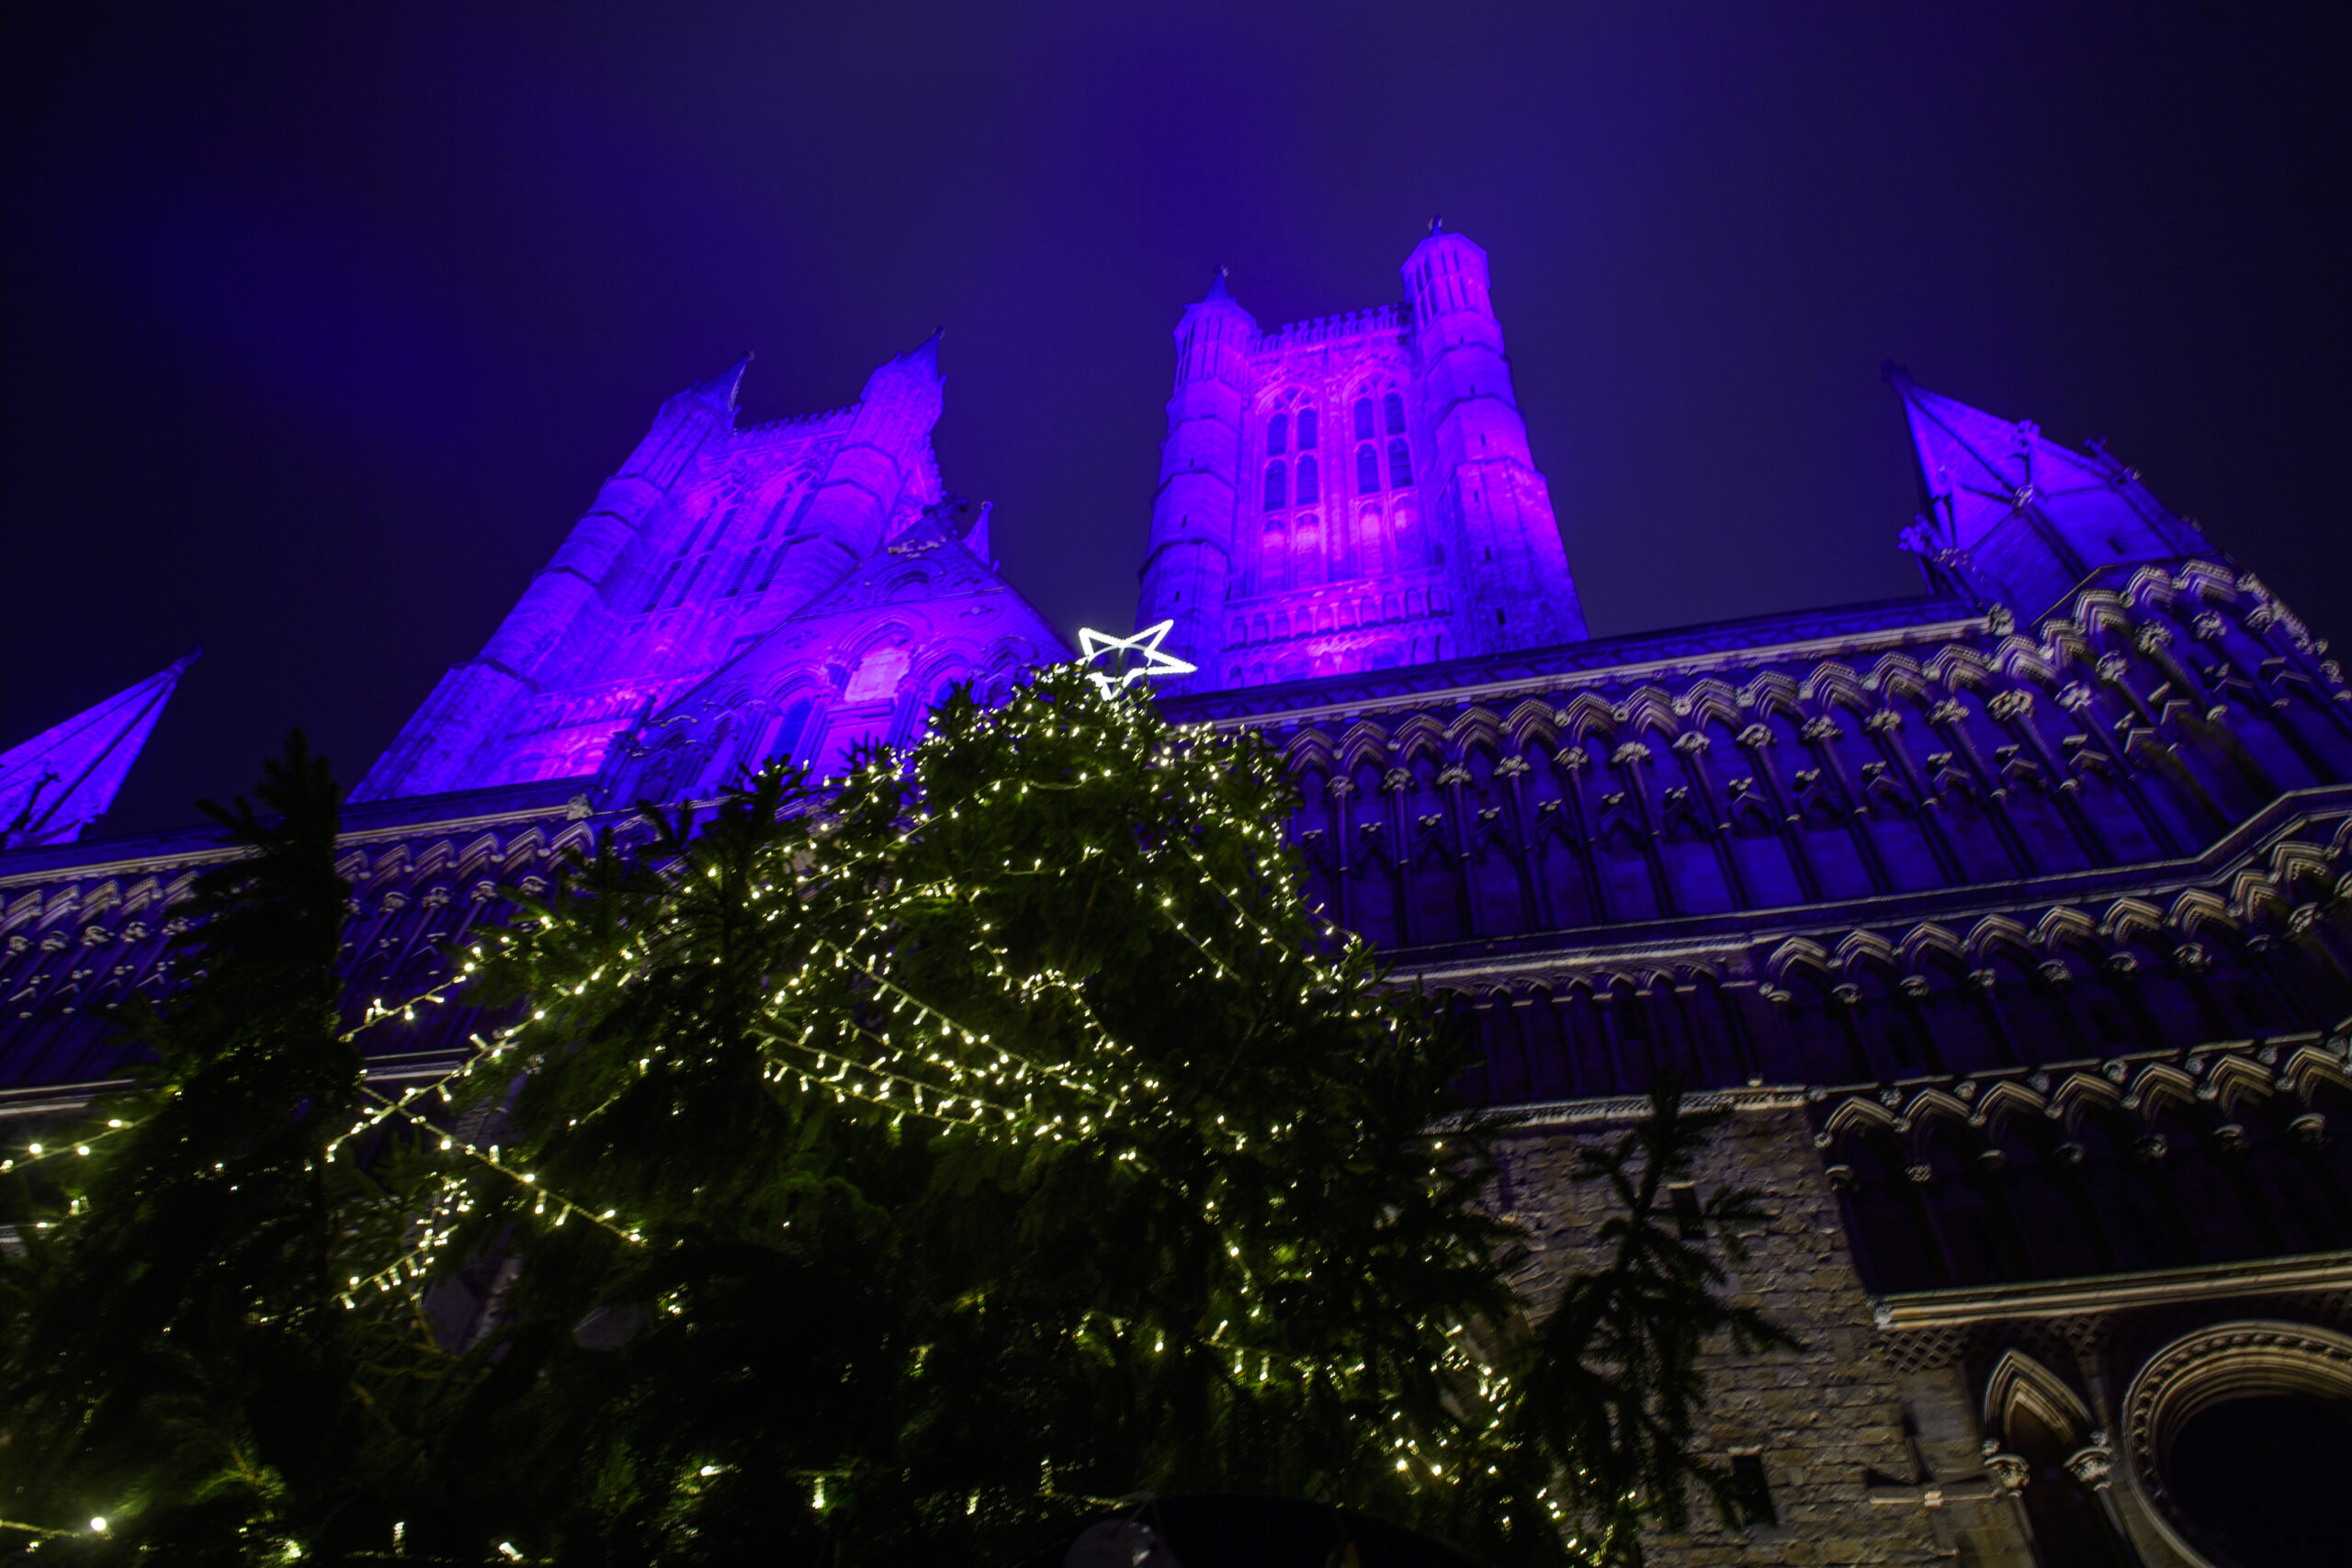 Christmas Tree decorated with Warm White Lights displayed outside Lincoln Cathedral for the Christmas season.